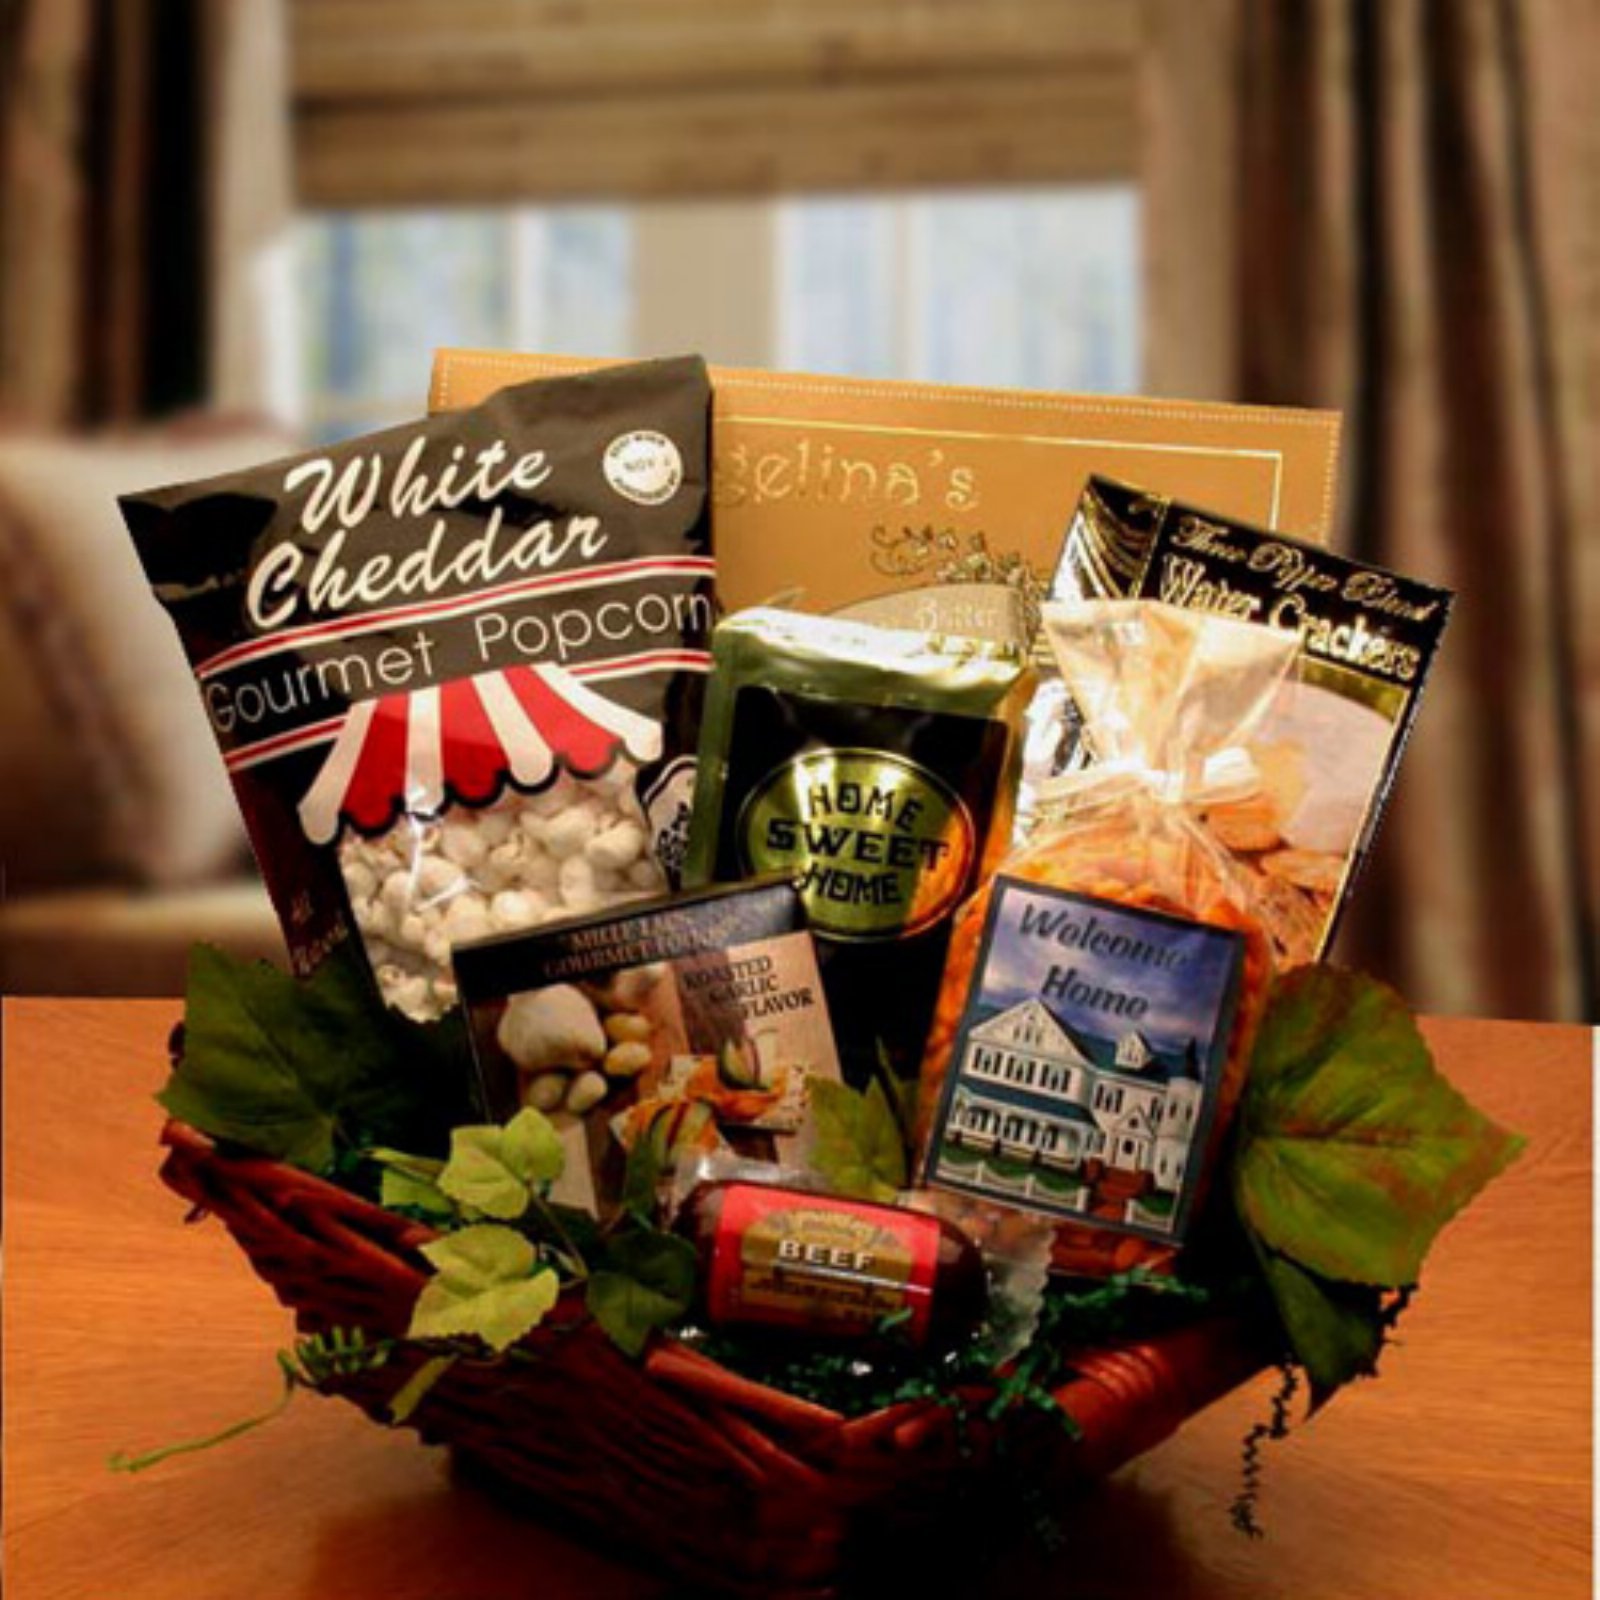 Gourmet Gift Baskets 14x12x10 in - image 1 of 1